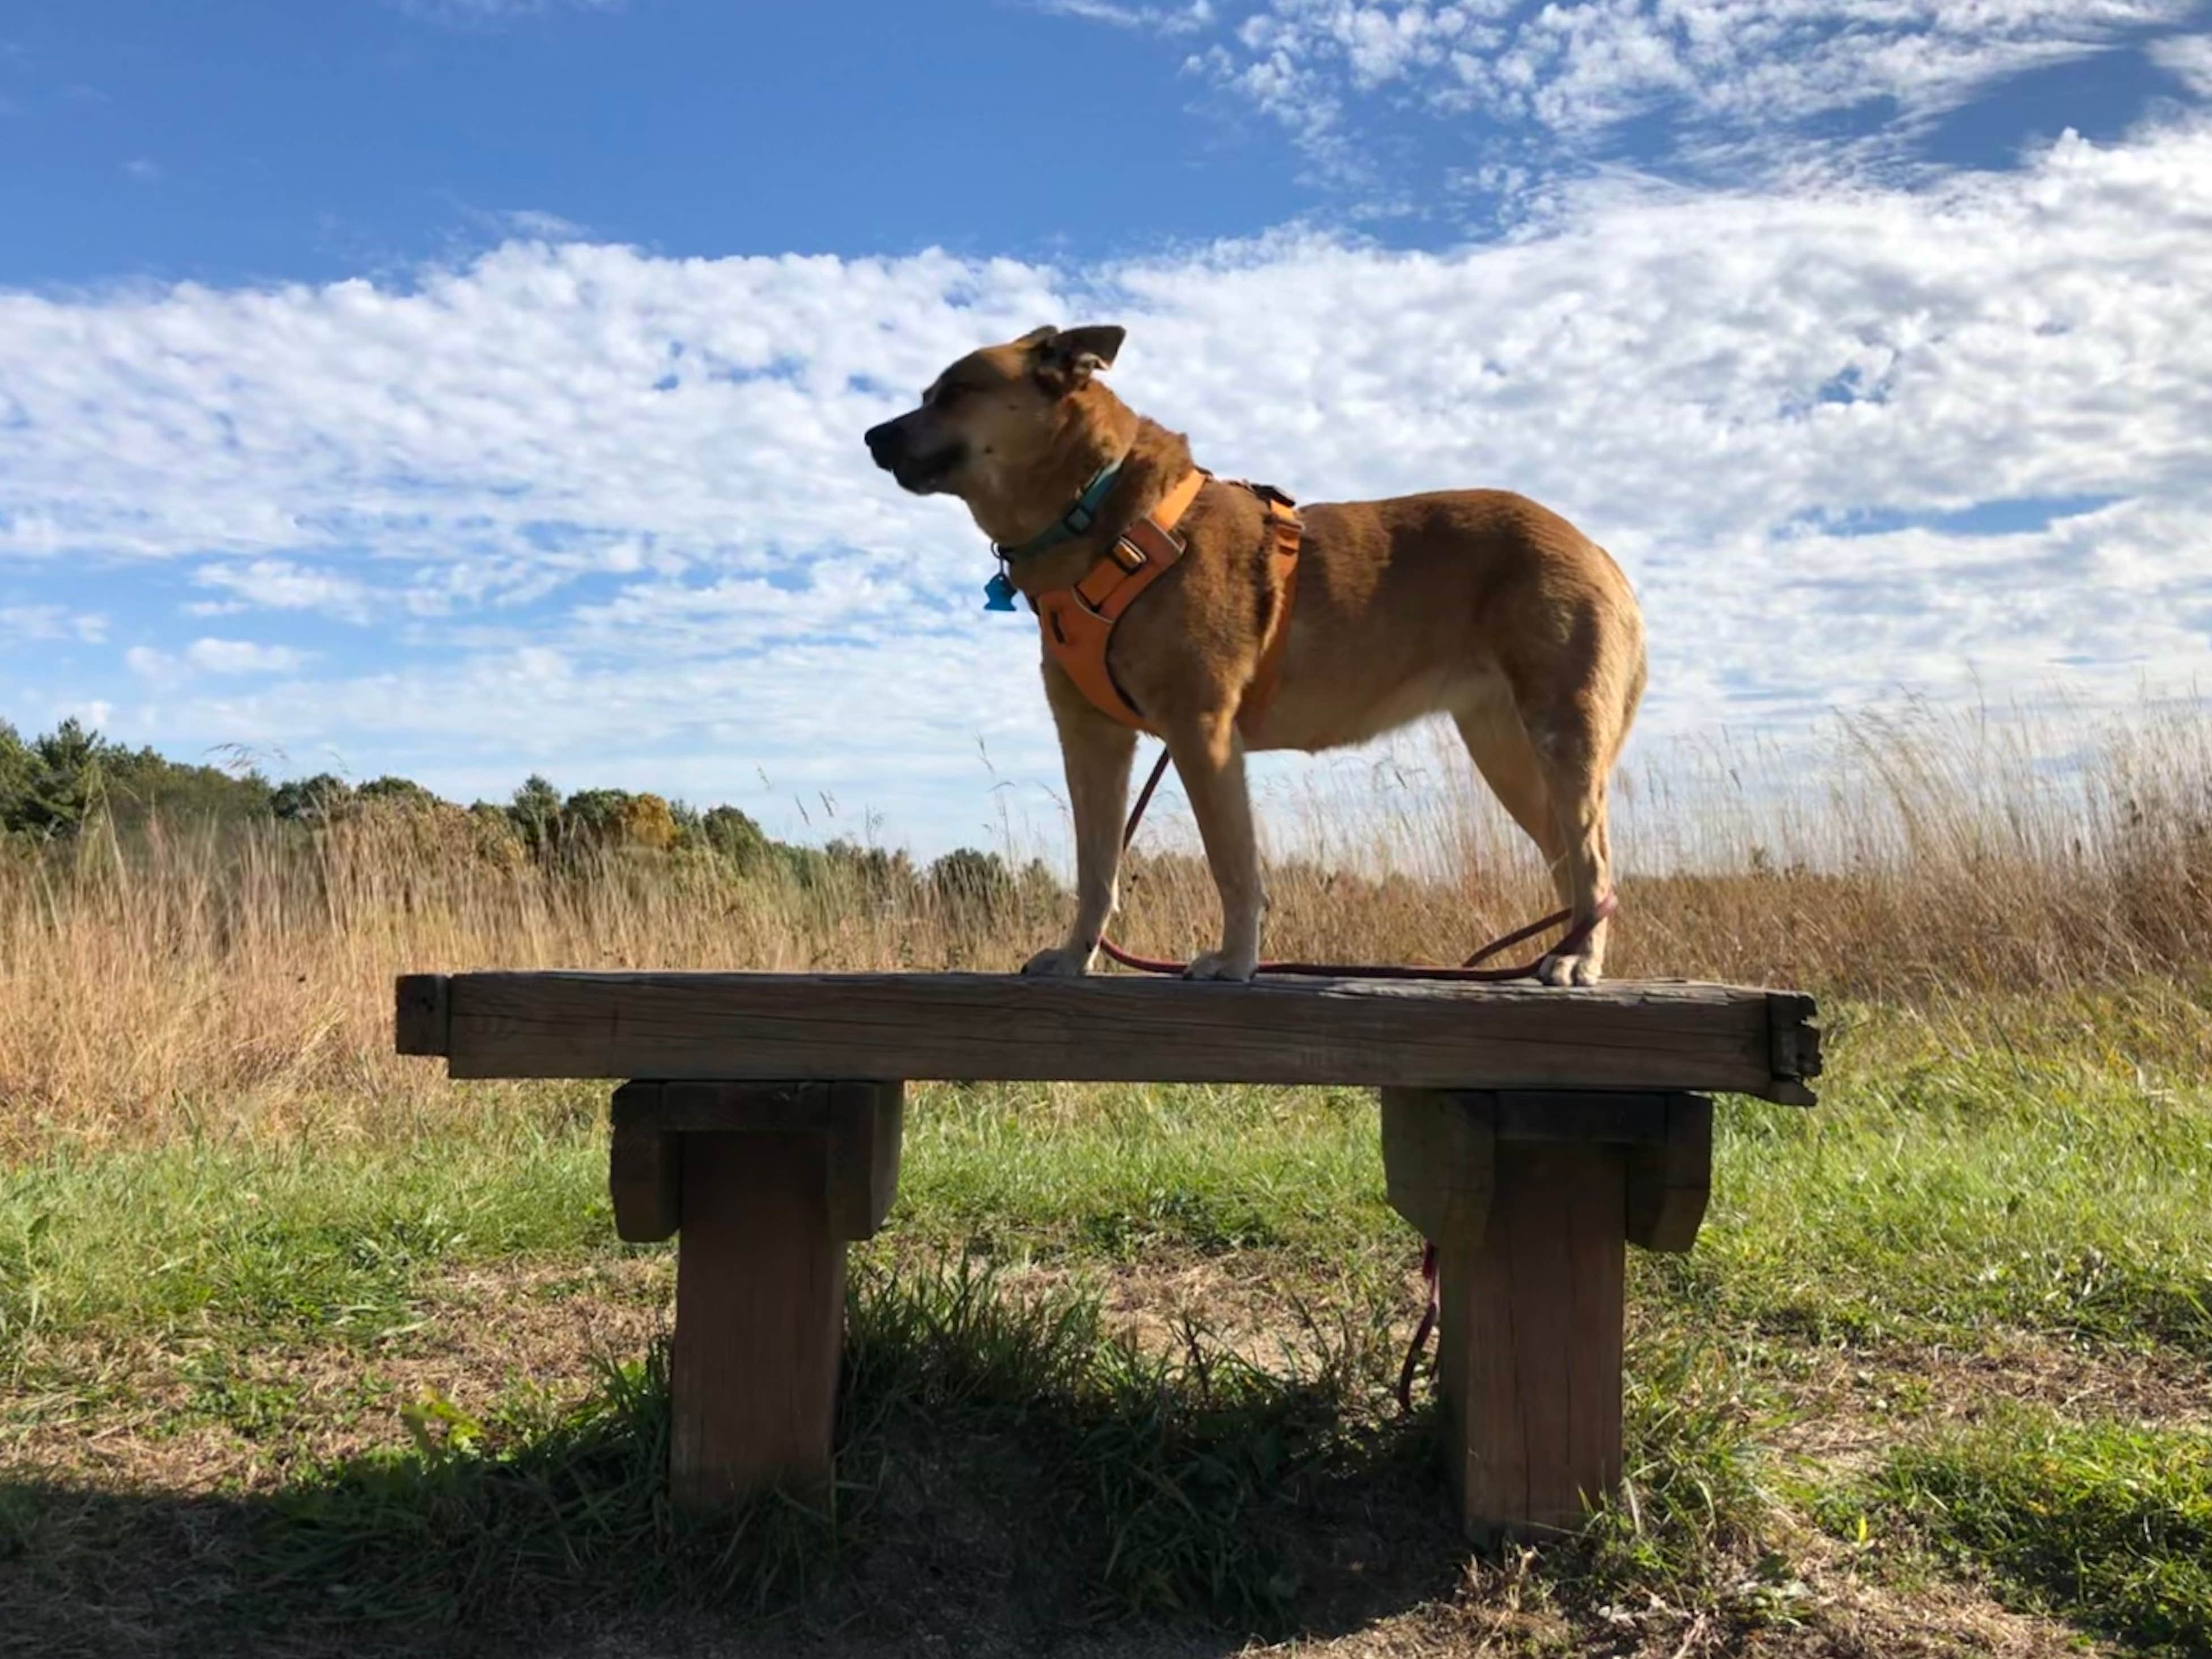 Benches can be found on some trails